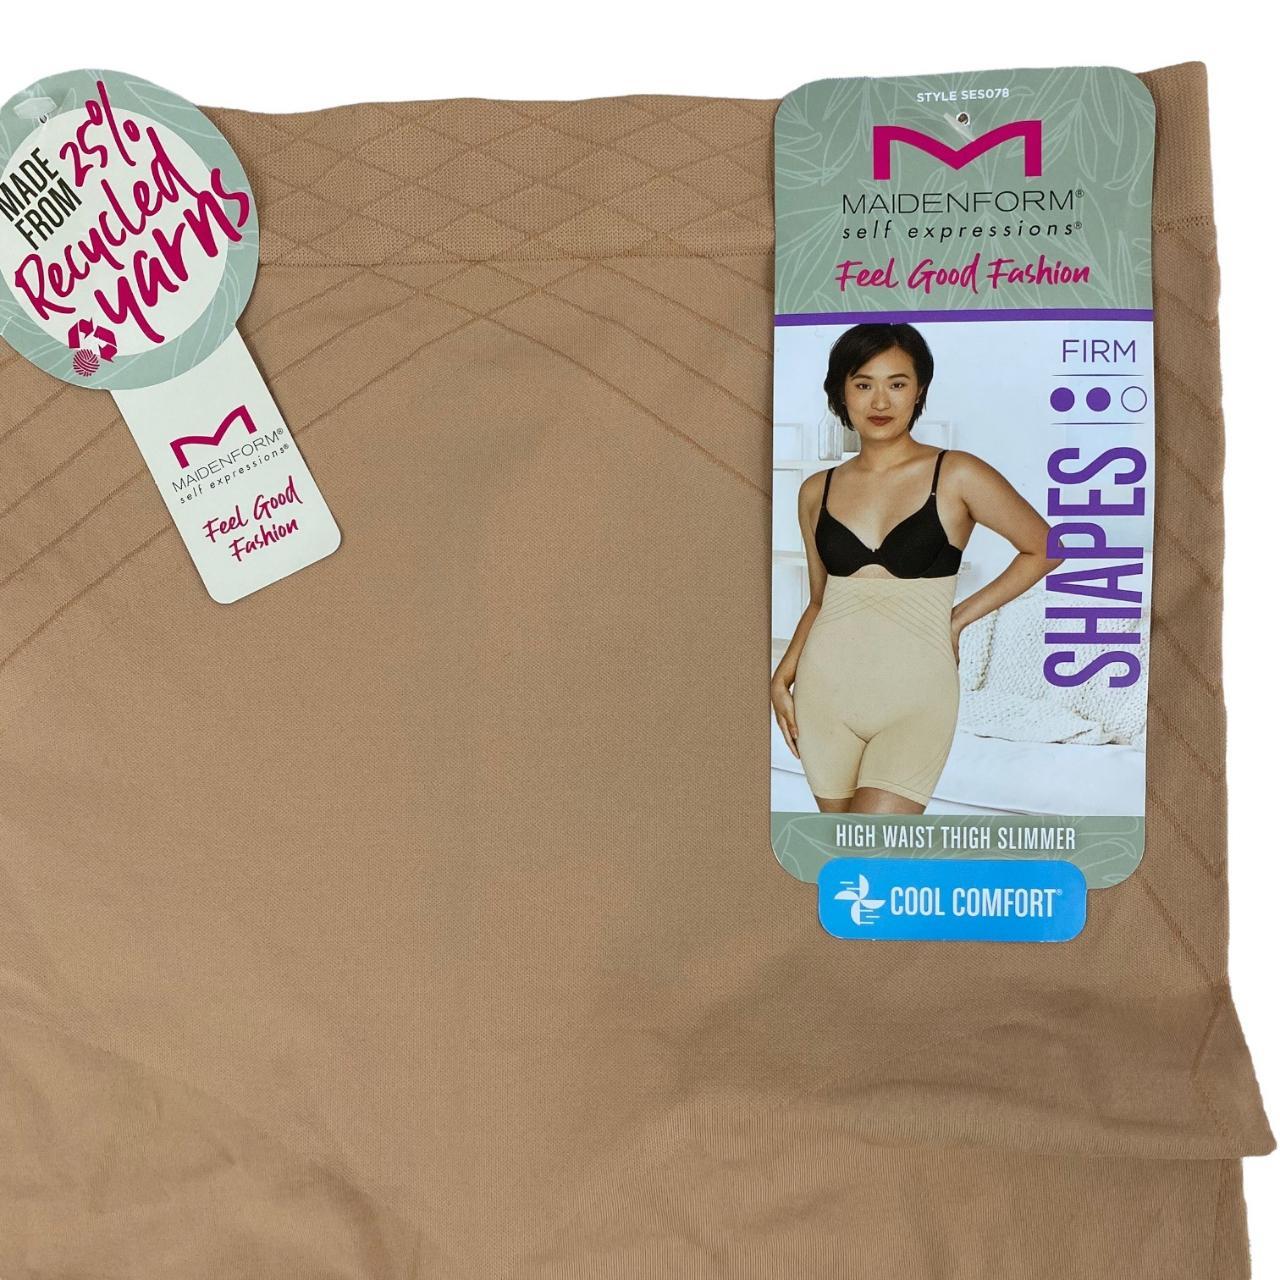 Product Image 4 - Maidenform Nude High Waist Thigh